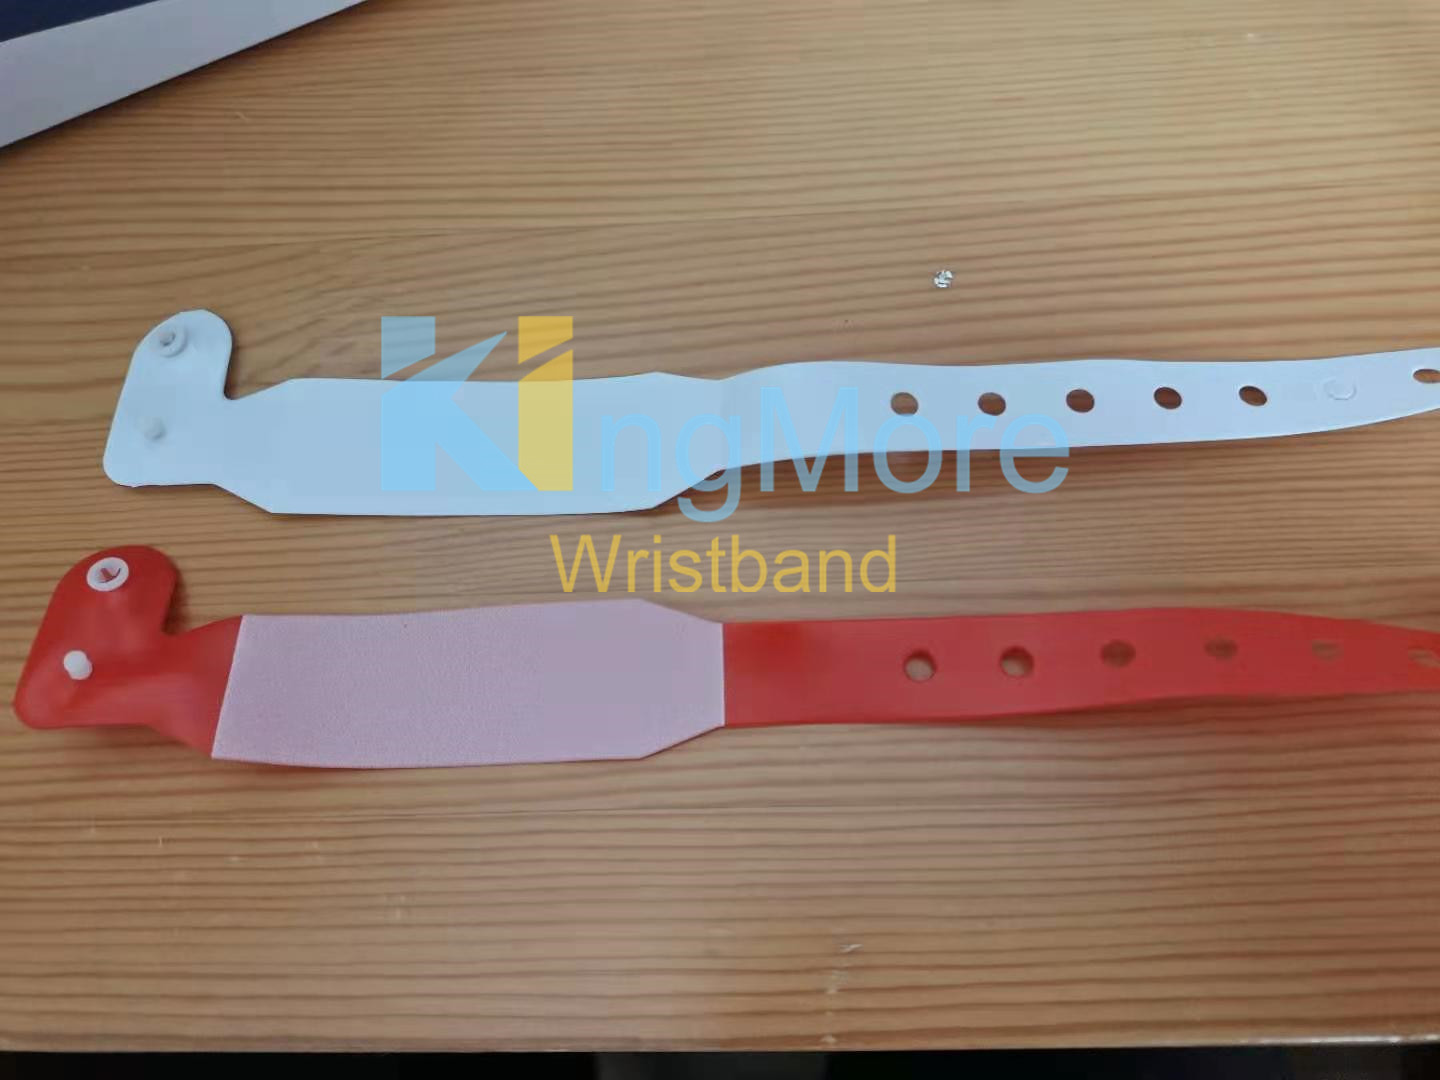 2021 hot seller European hospital use patient id wristband